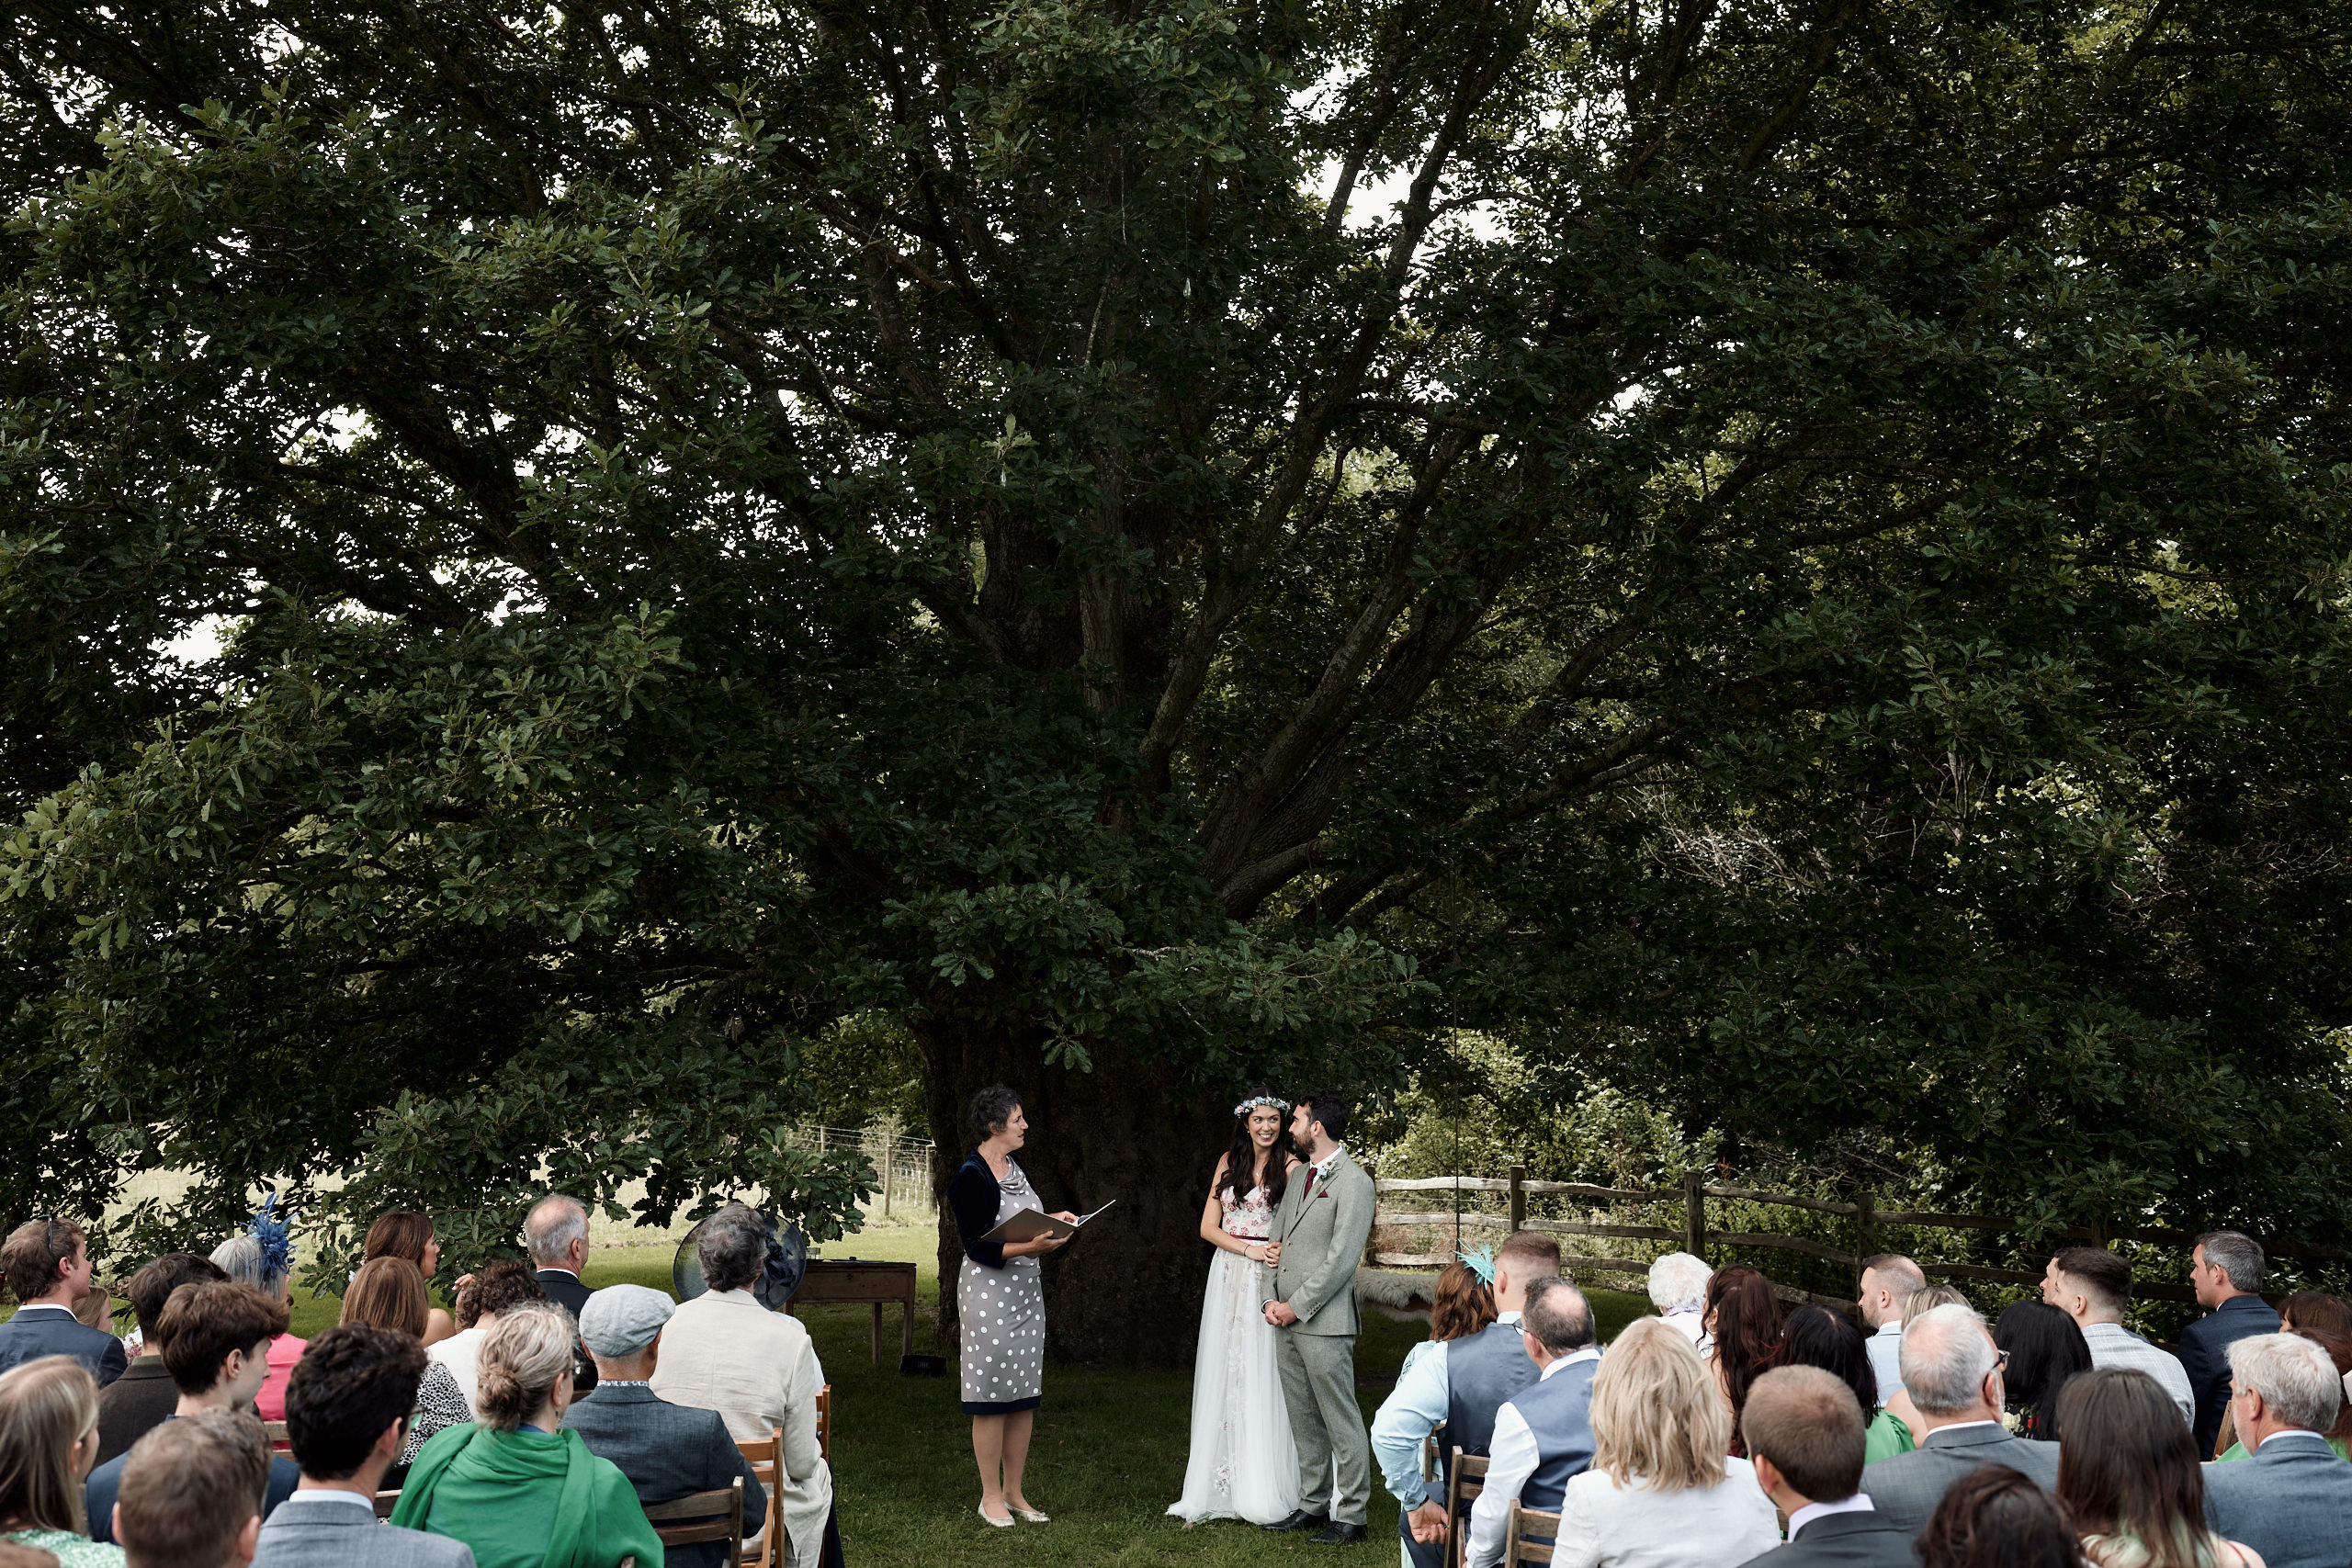 A wedding taking place under a big tree.